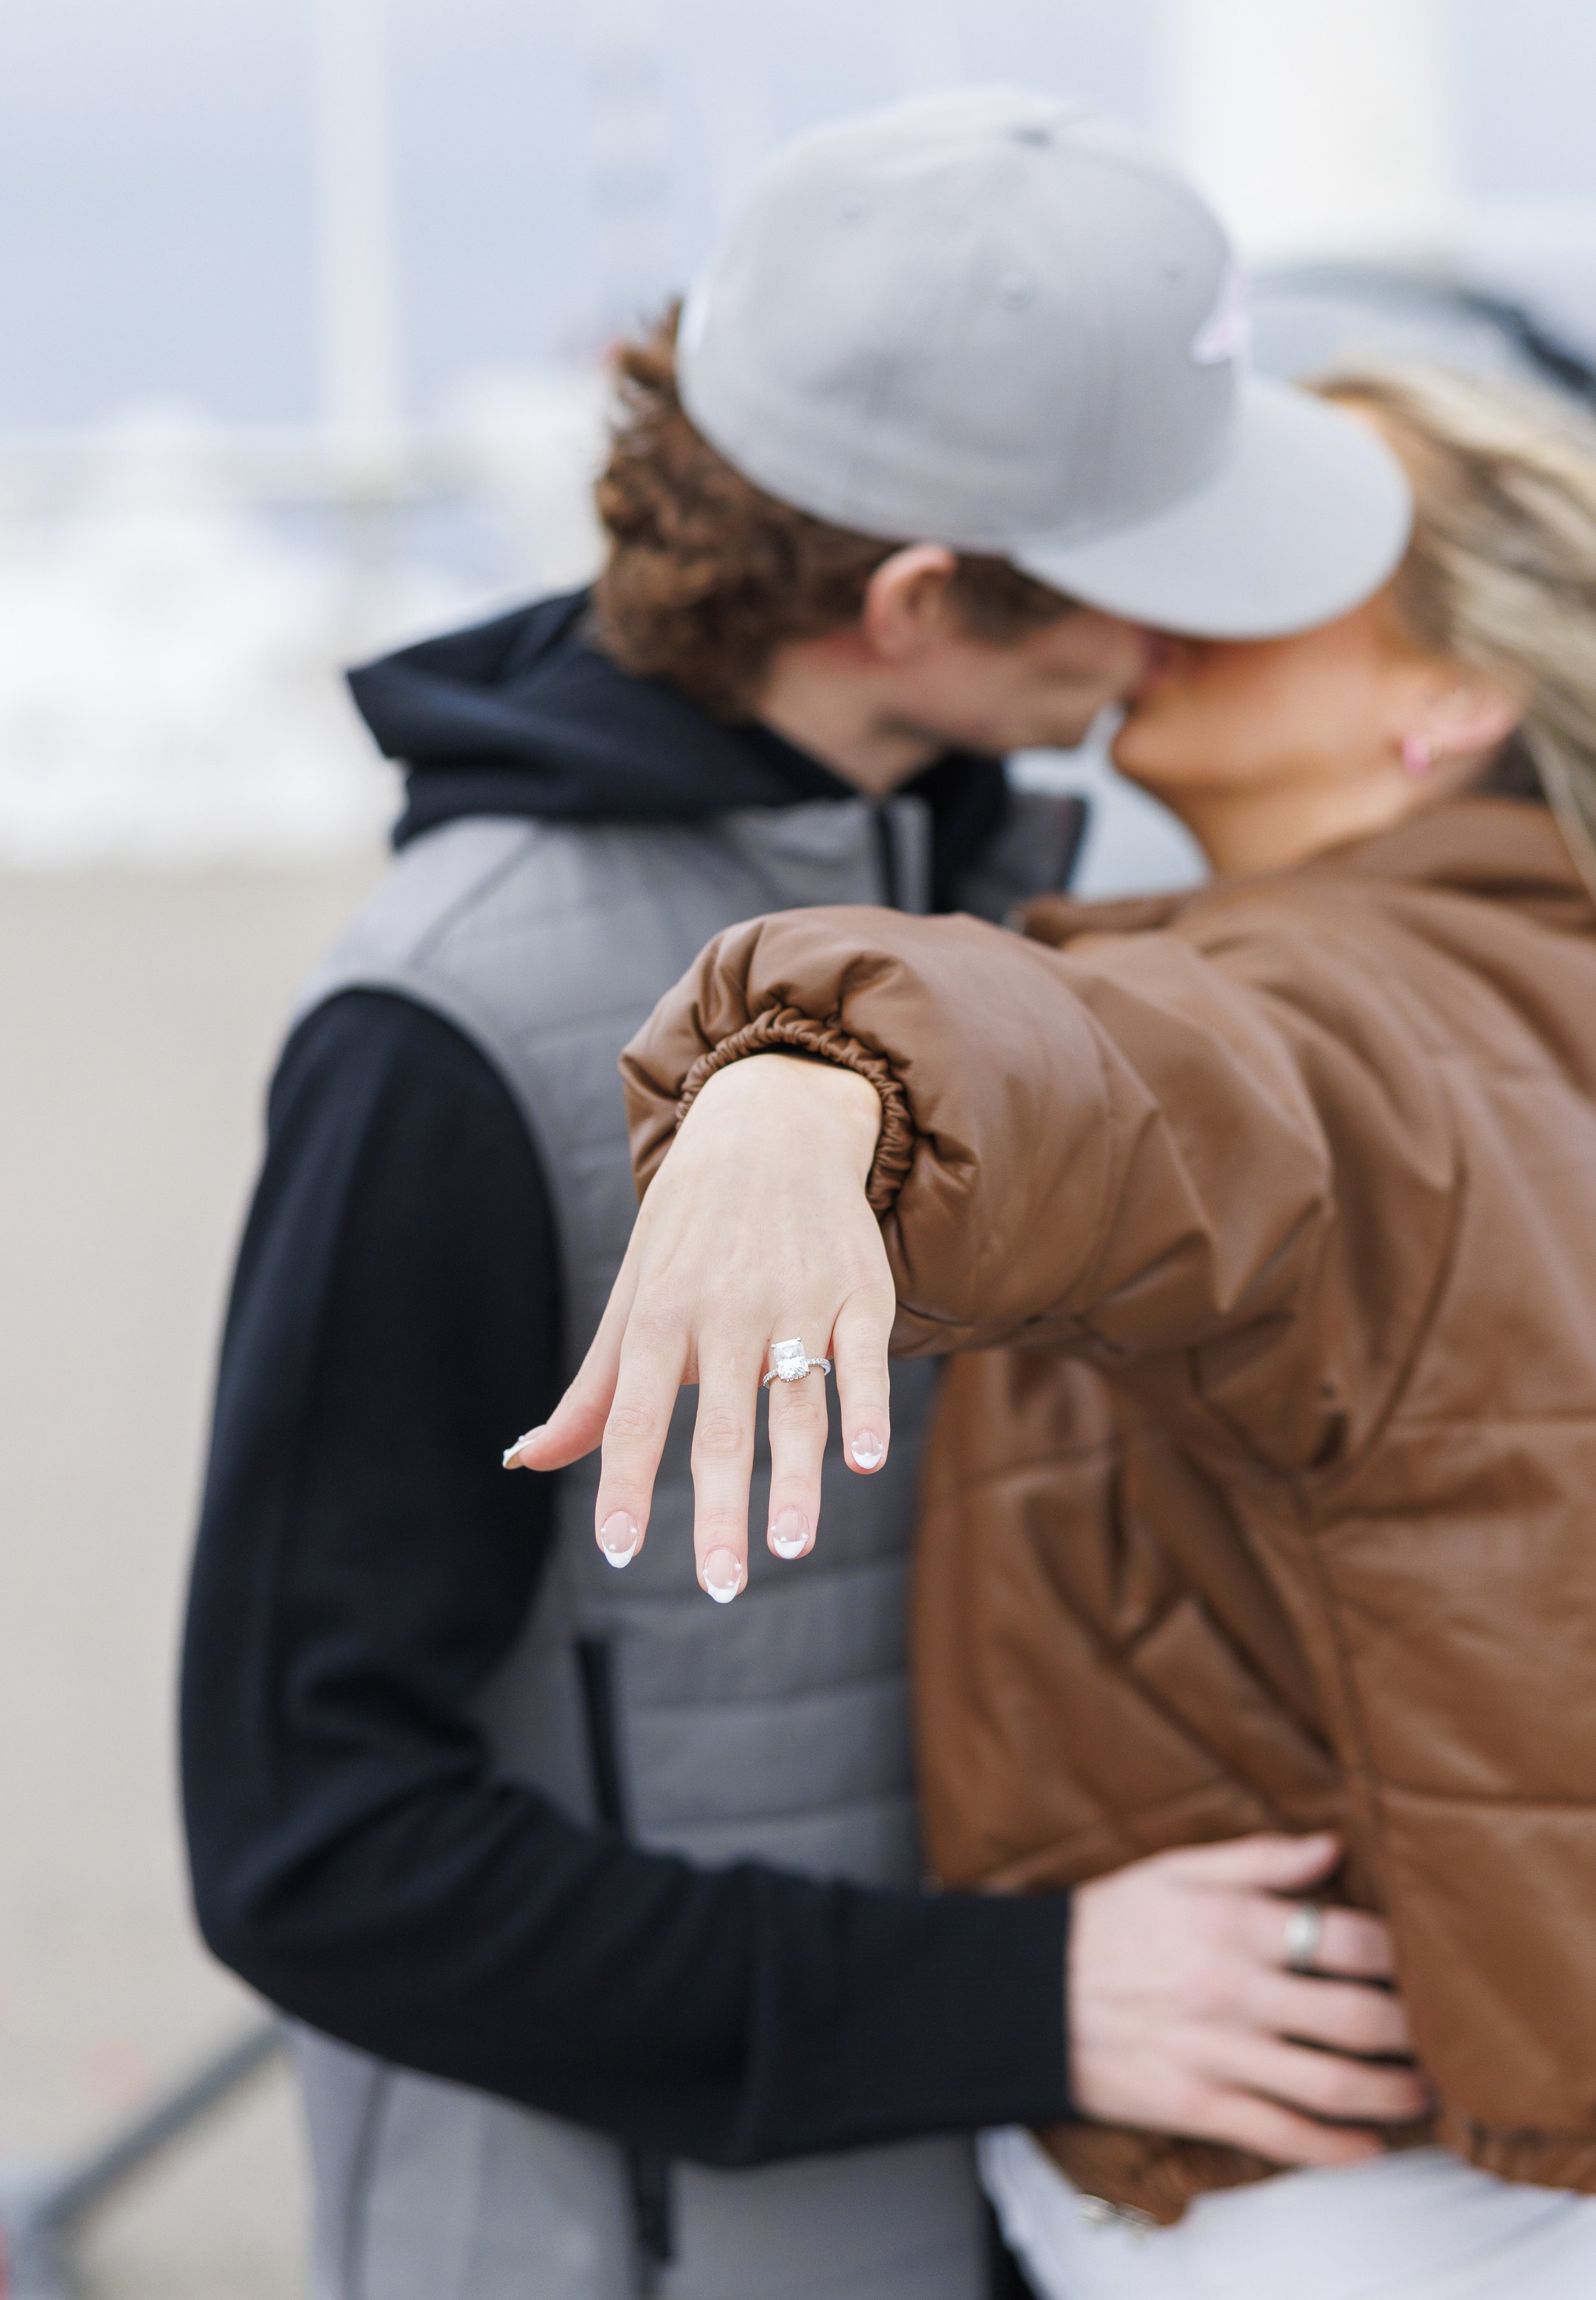  Boyfriend and girlfriend kiss after the proposal with the woman showing off the ring by Savanna Richardson Photography. spring proposals ring proposal portrait #SavannaRichardsonPhotography #SavannaRichardsonEngagements #utahproposals #helicopterpro